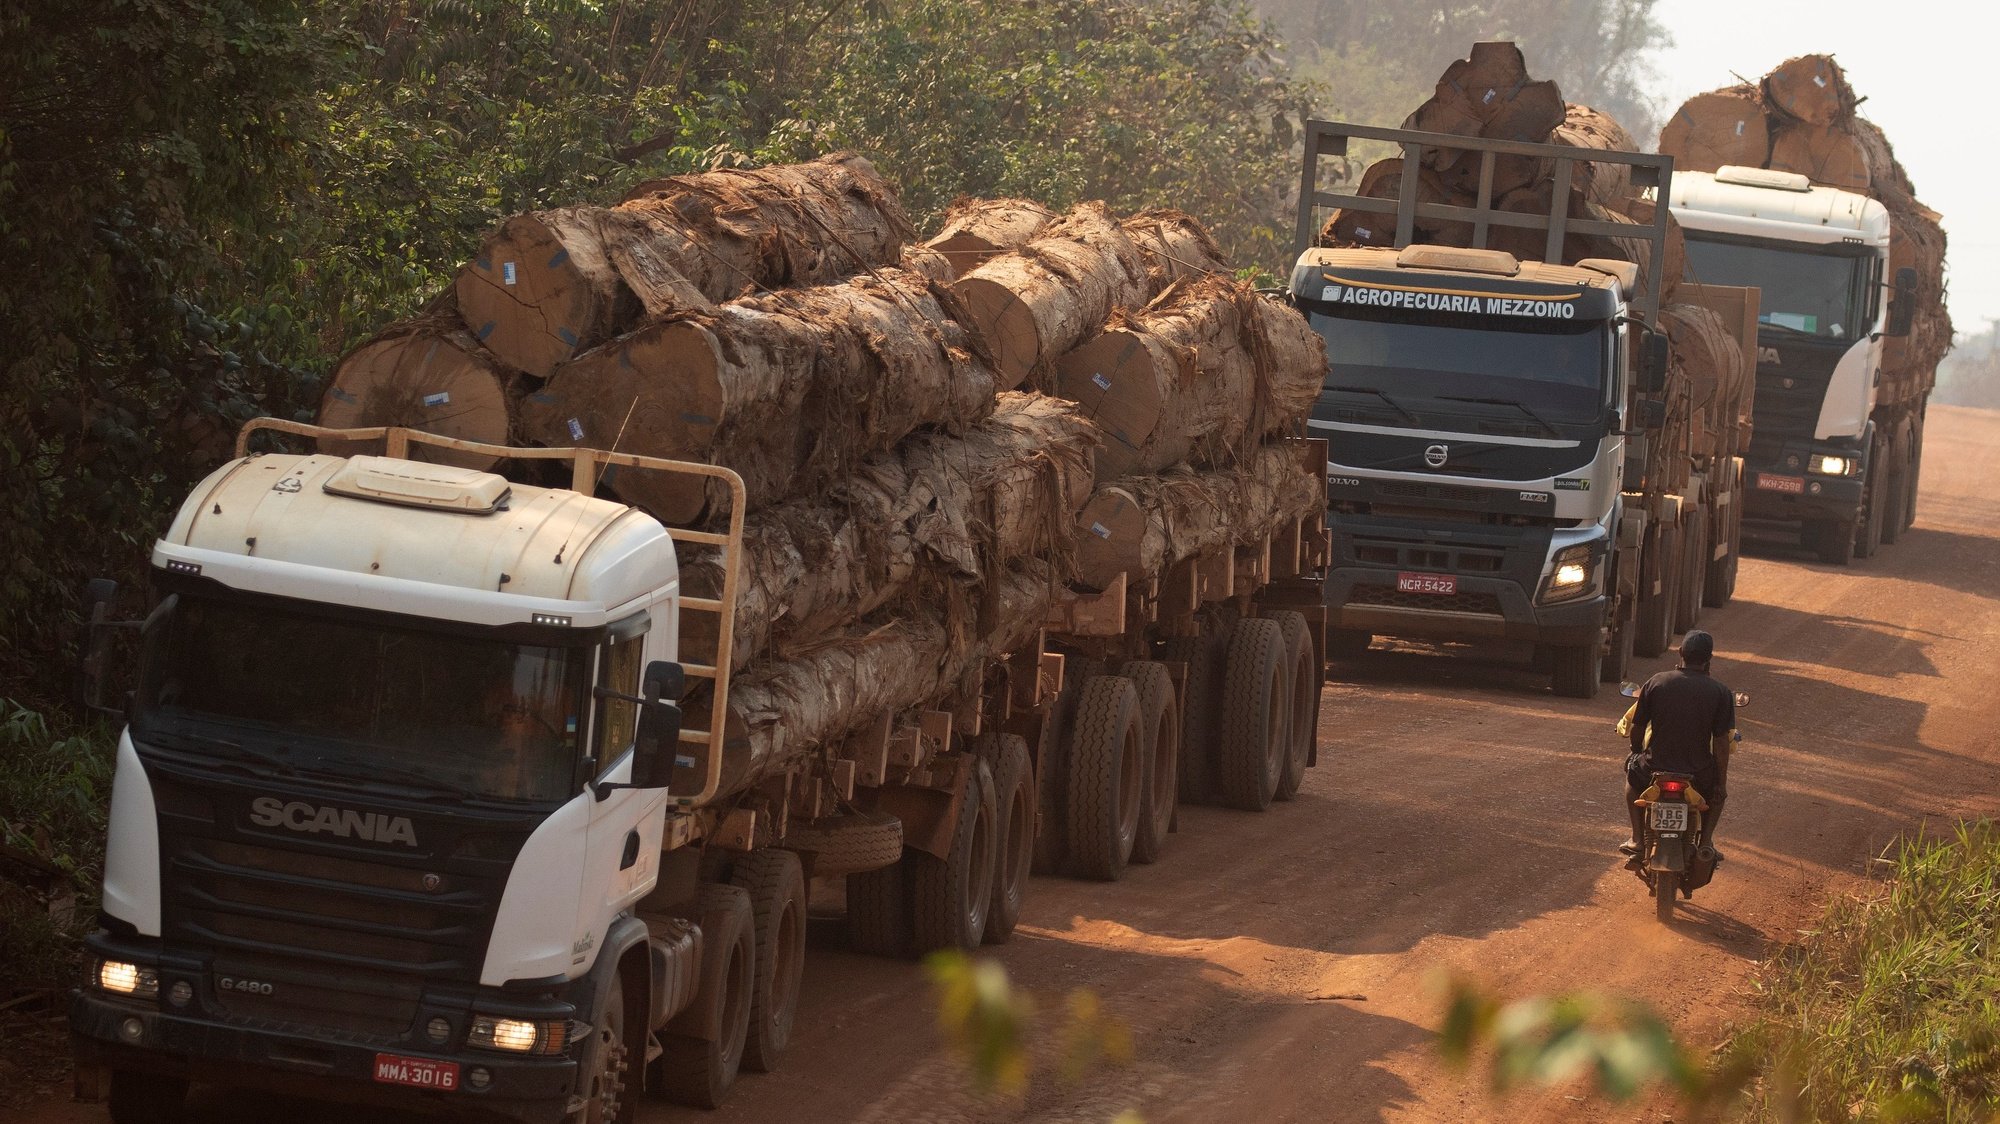 epa07798329 Three trucks transport wood extracted from the Amazon rainforest in the state of Rondonia, Brazil, 27 August 2019. The Brazilian Army and the National Public Security Force (FNSP), an elite group of the Police, mobilized almost 1,000 troops Tuesday to fight fires that affect the Jacunda National Forest, a natural park near Porto Velho, capital of the Amazon state of Rondonia. &#039;The goal is to fight environmental crimes with emphasis on fire sources,&#039; the Ministry of Defense said in a statement.  EPA/Joedson Alves